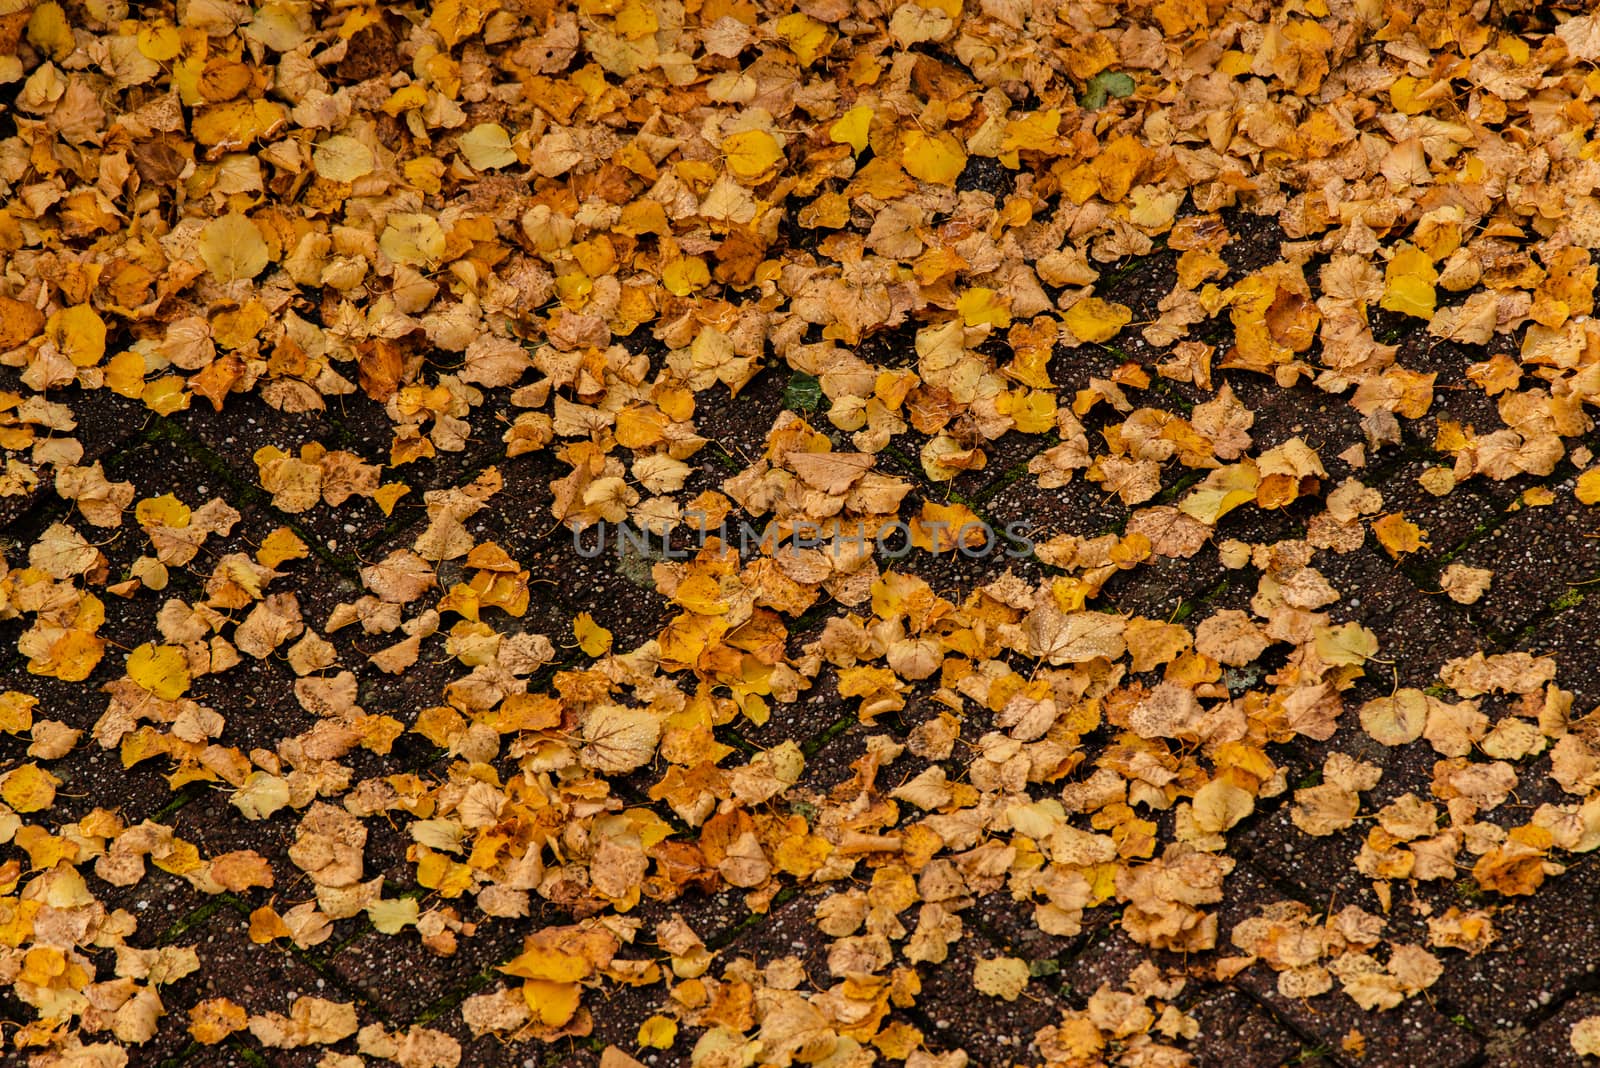 View from above of orange and yellow leaves on the ground by Pendleton